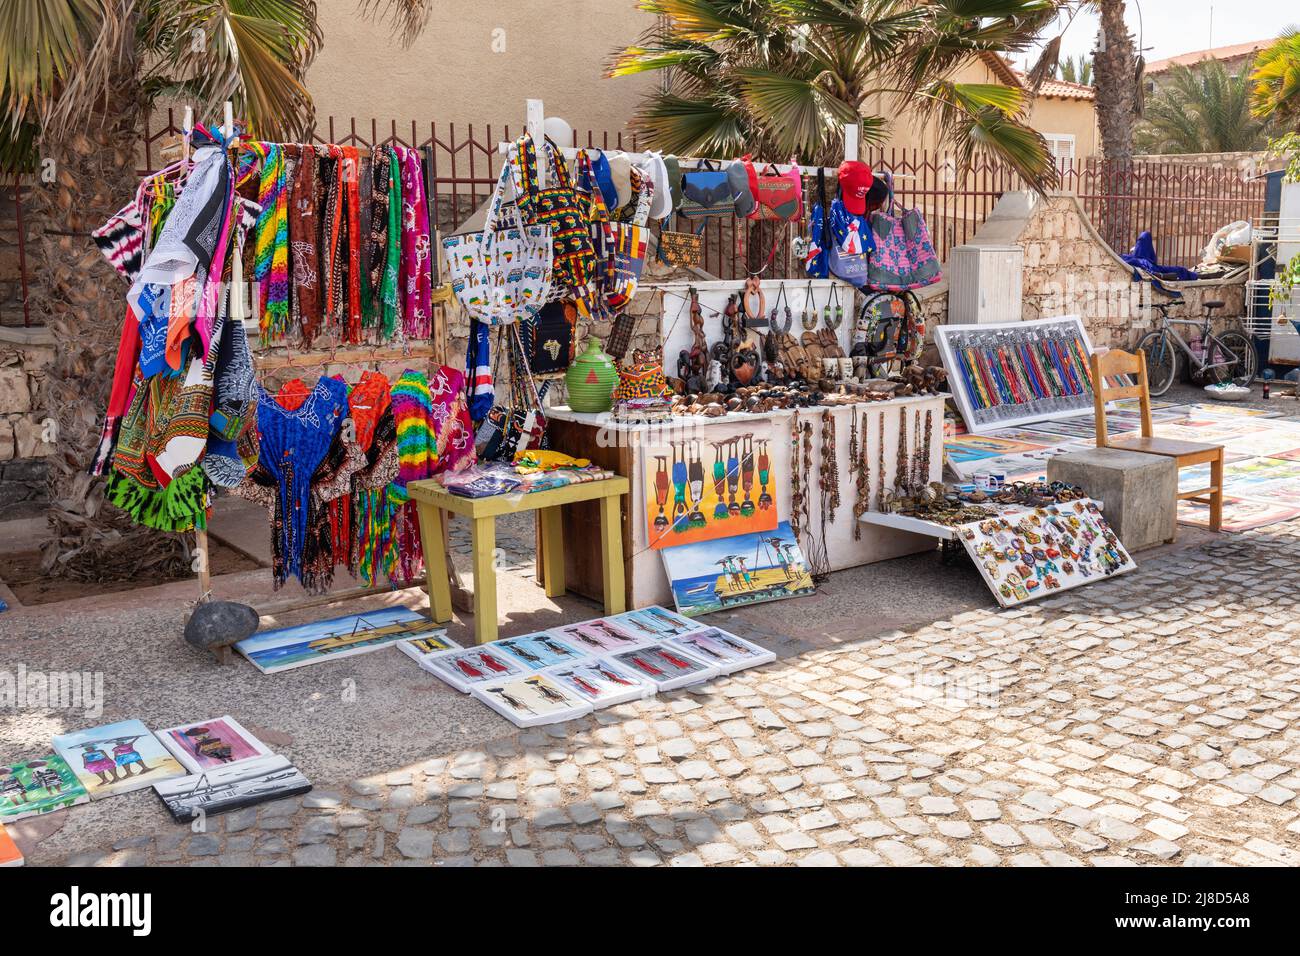 A colourful market stall of a street vendor selling souvenirs to tourists, Santa Maria, Sal, Cape Verde, Cabo Verde Islands, Africa Stock Photo